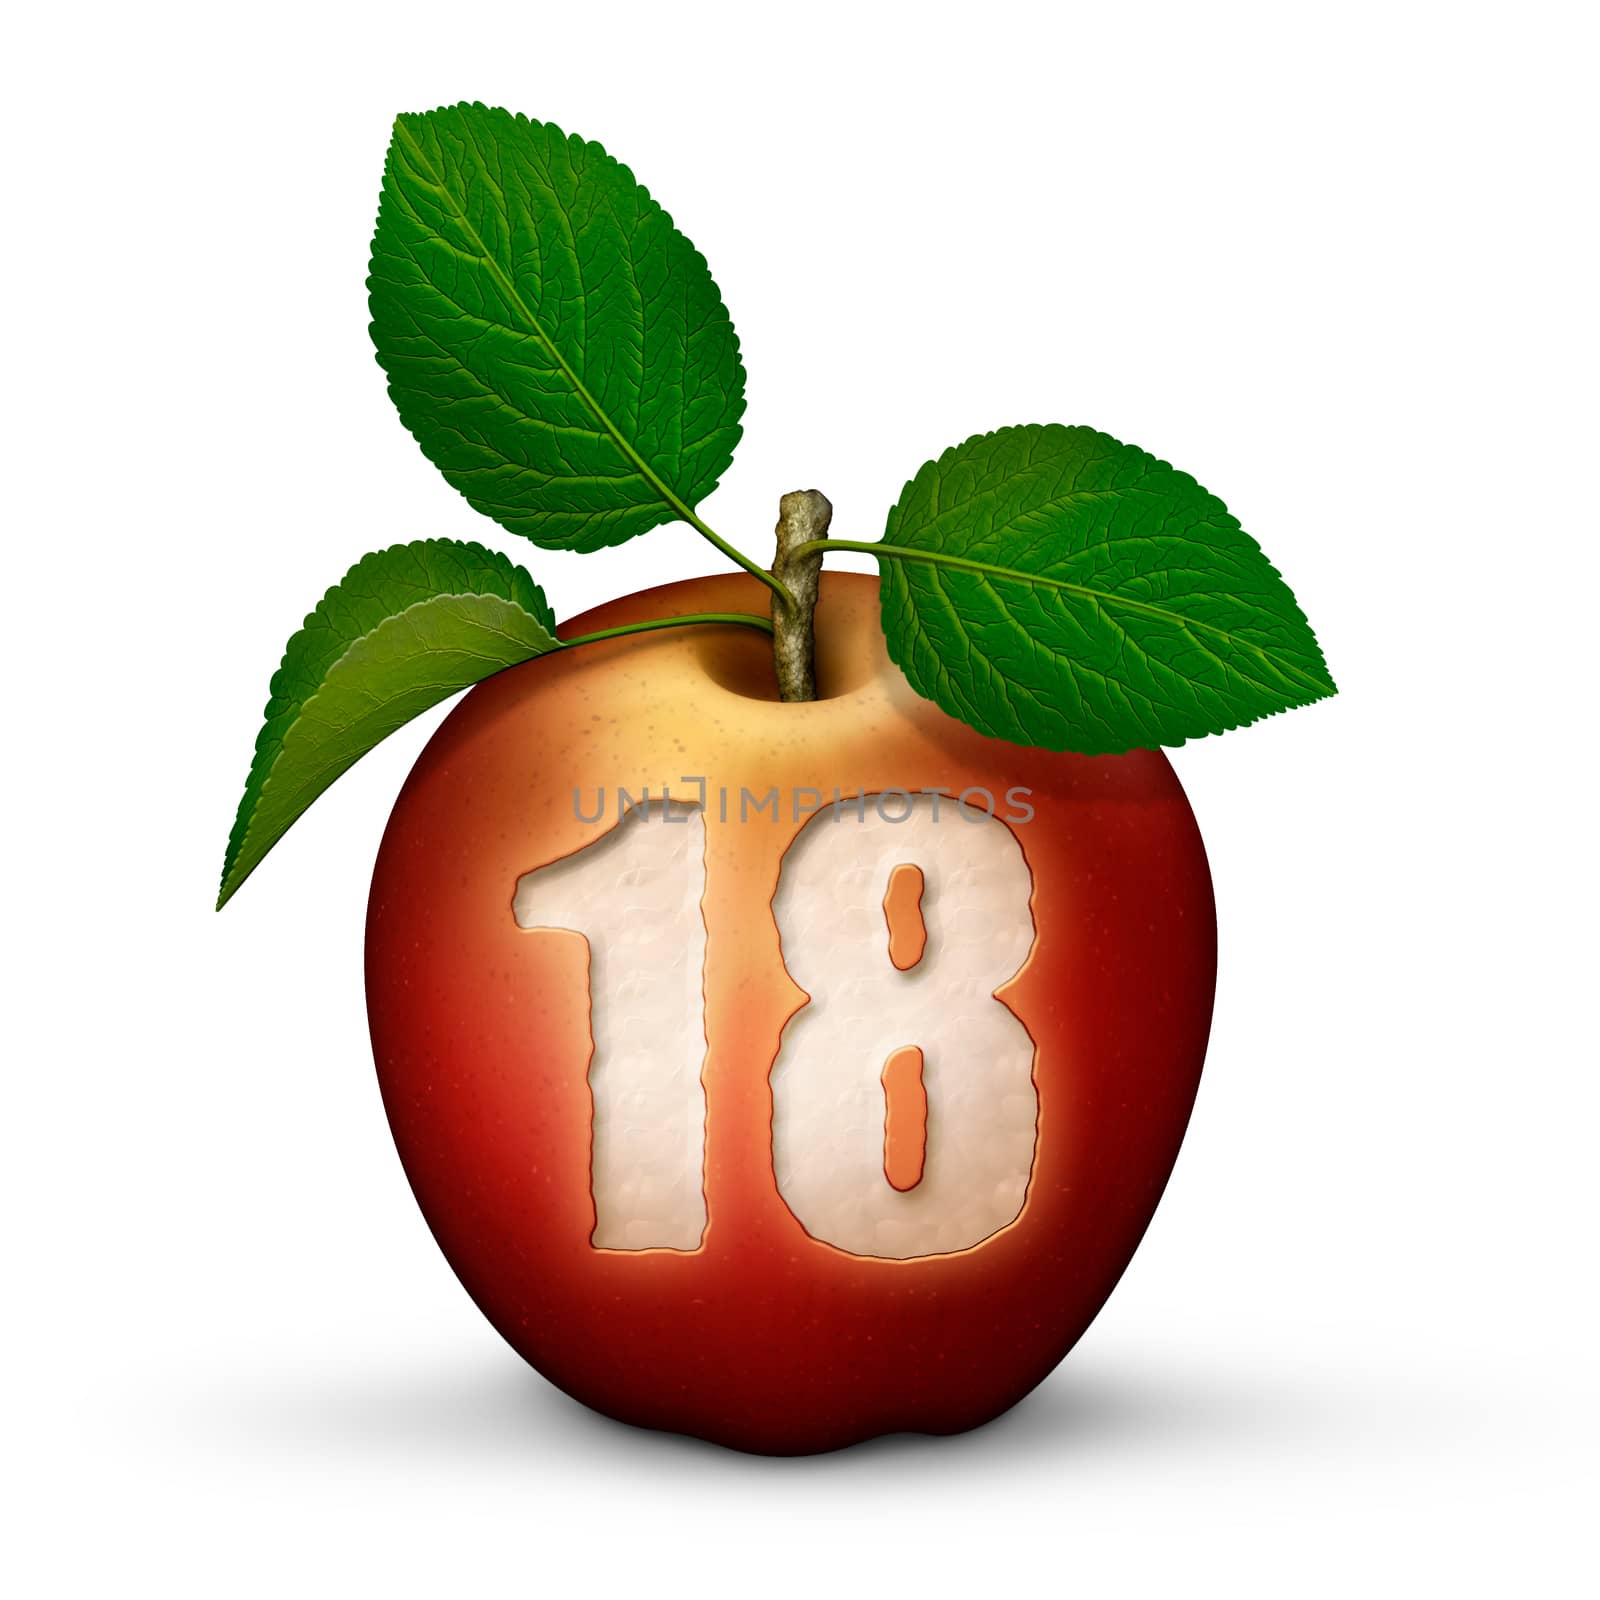 3D illustration of an apple with the number 18 bitten out of it.